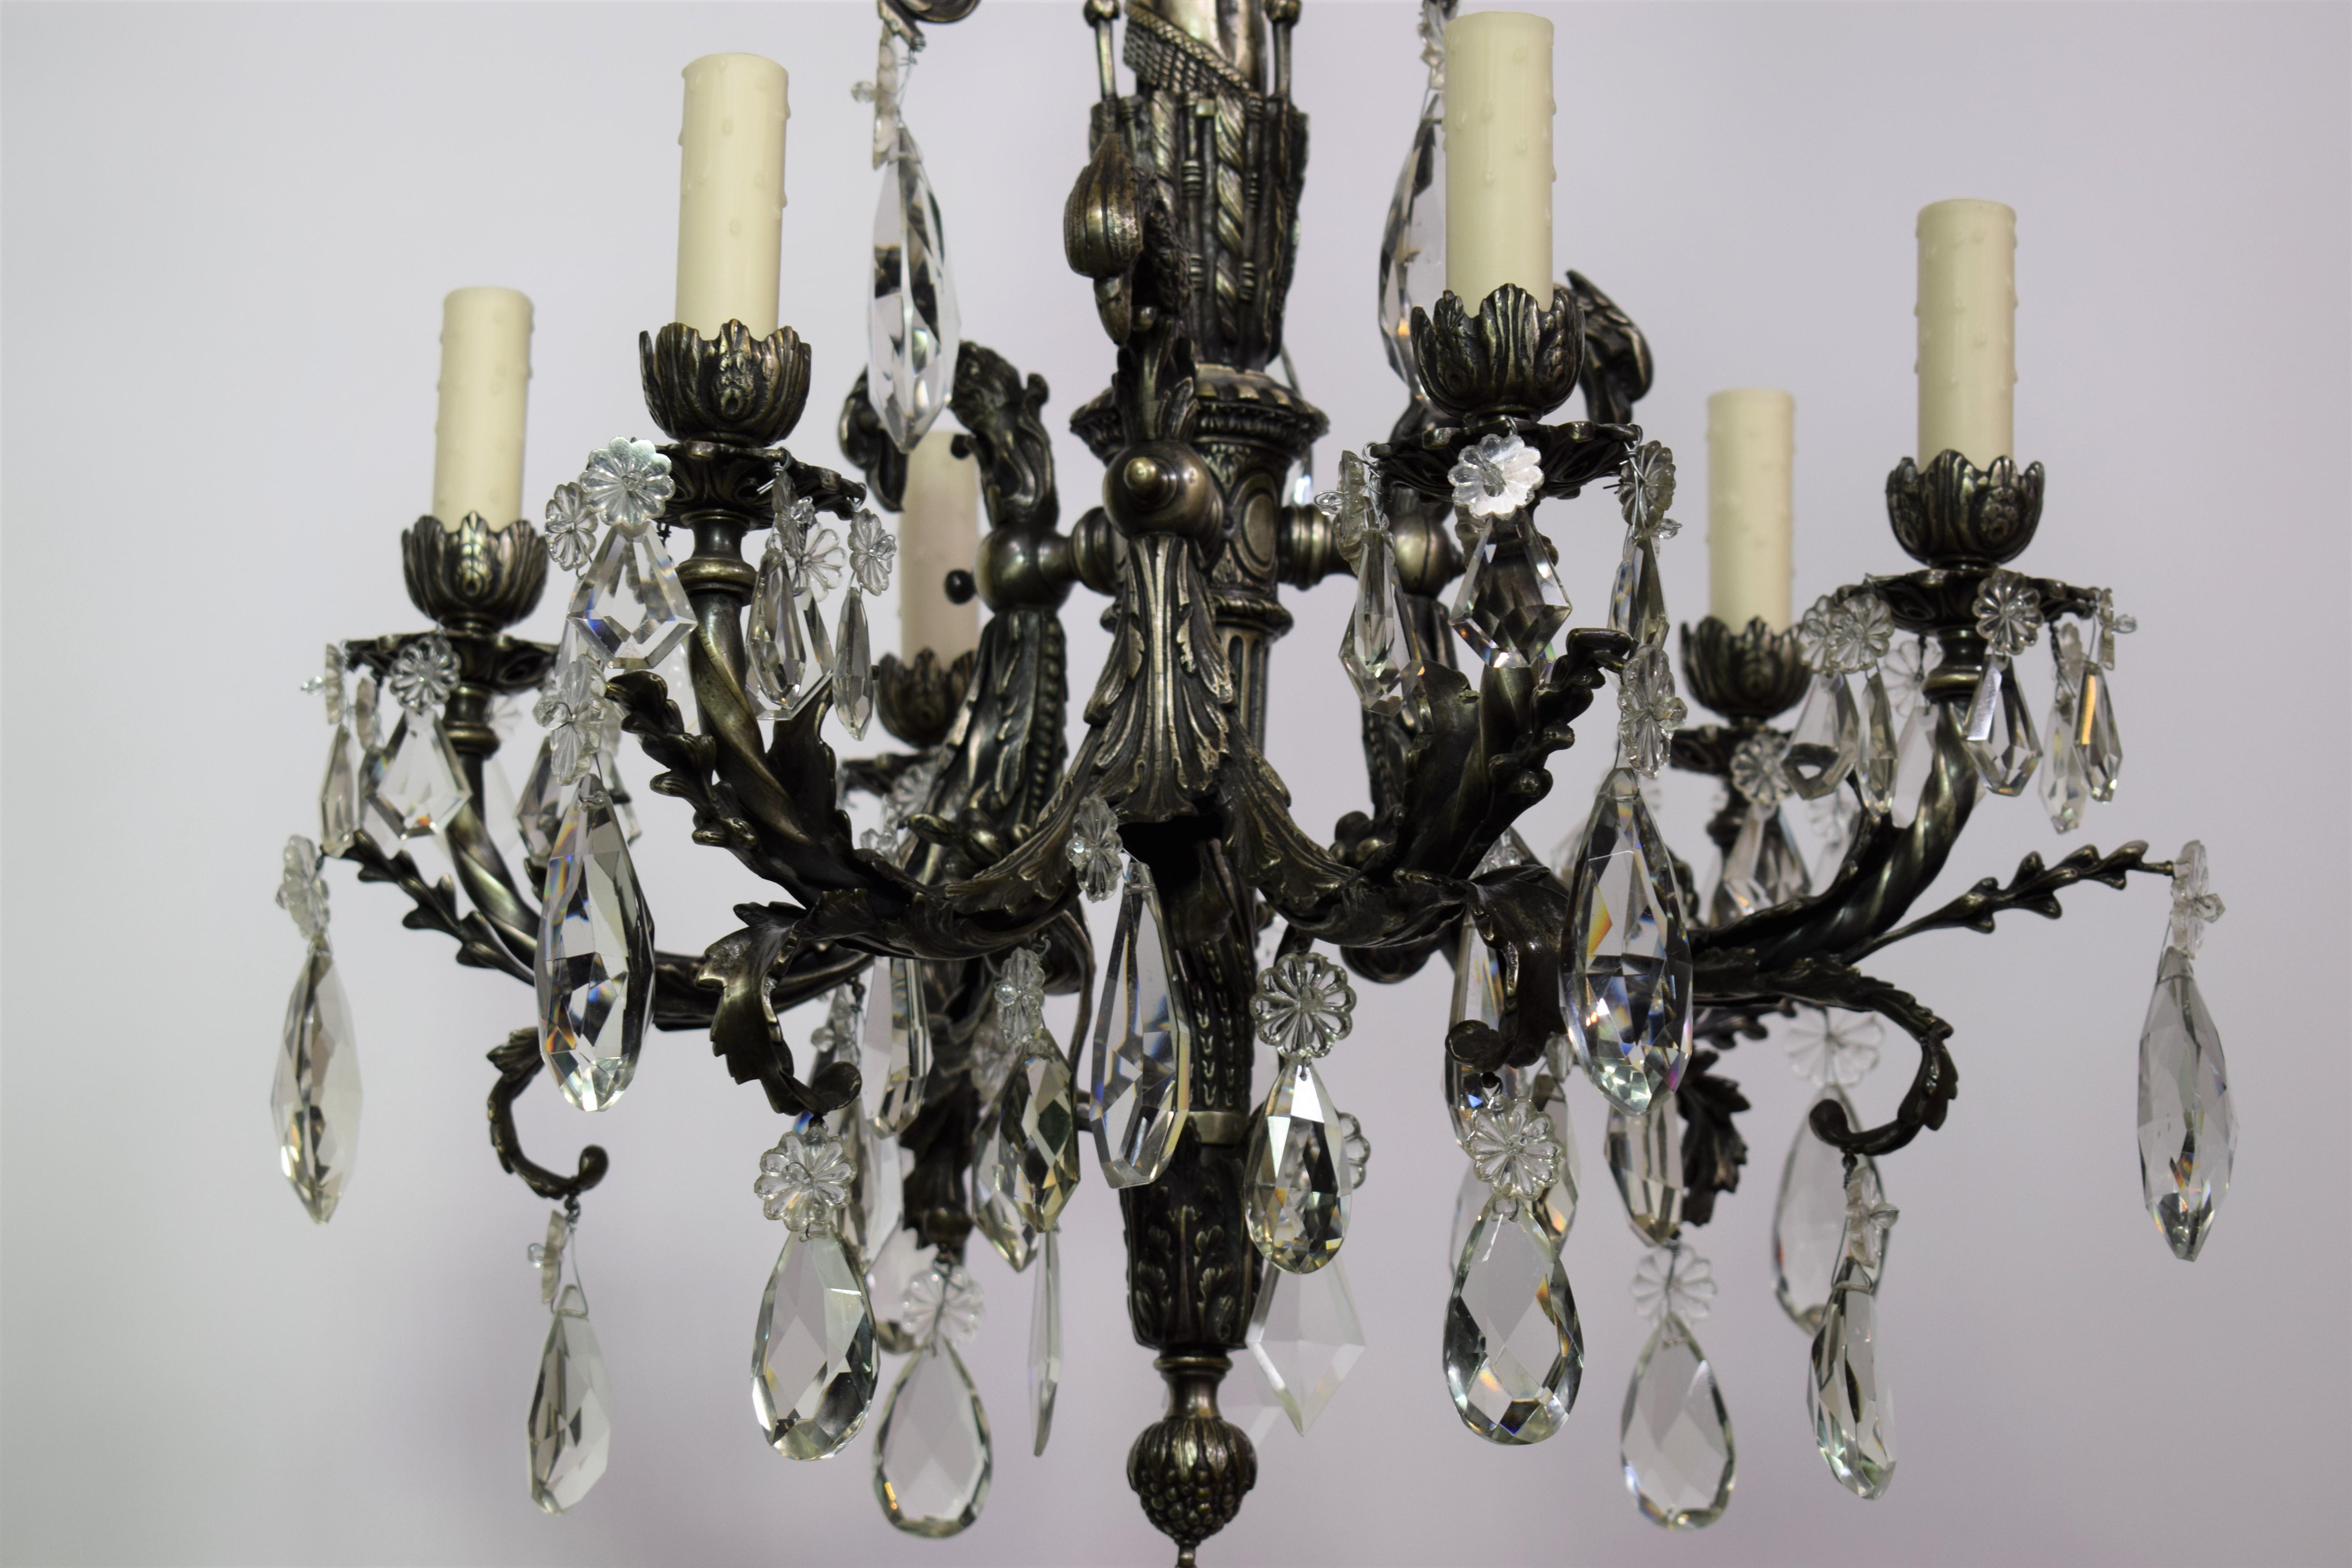 A magnificent silver over bronze and crystal chandelier featuring eagle's head. Great quality.  6-lights.  France, circa 1900
Dimensions:  Height 35